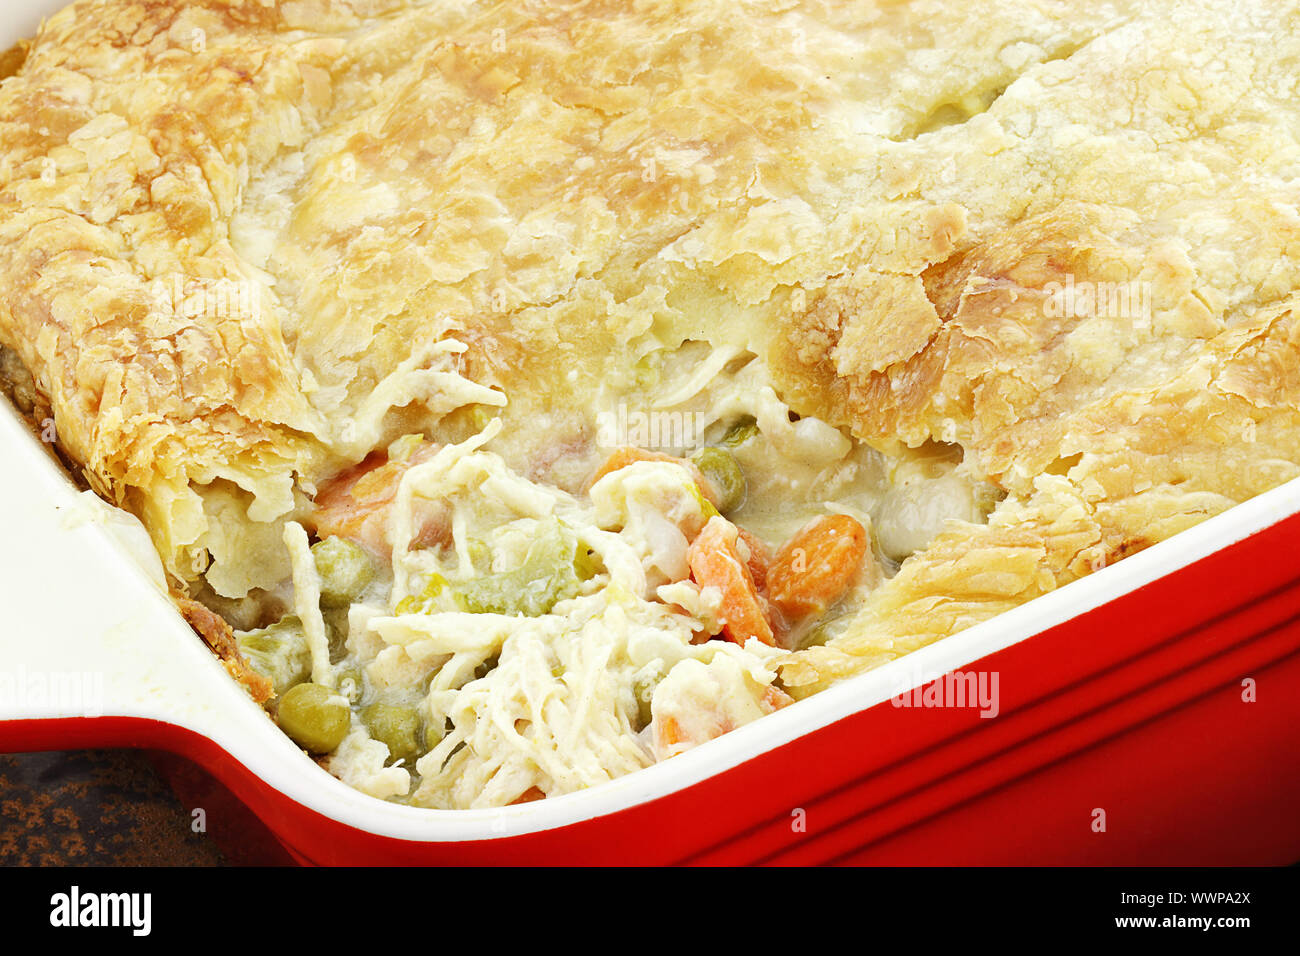 Above view of fresh Chicken Pot Pie with wooden spoon. Section of pot pie removed to reveal chicken, carrots and peas. Stock Photo